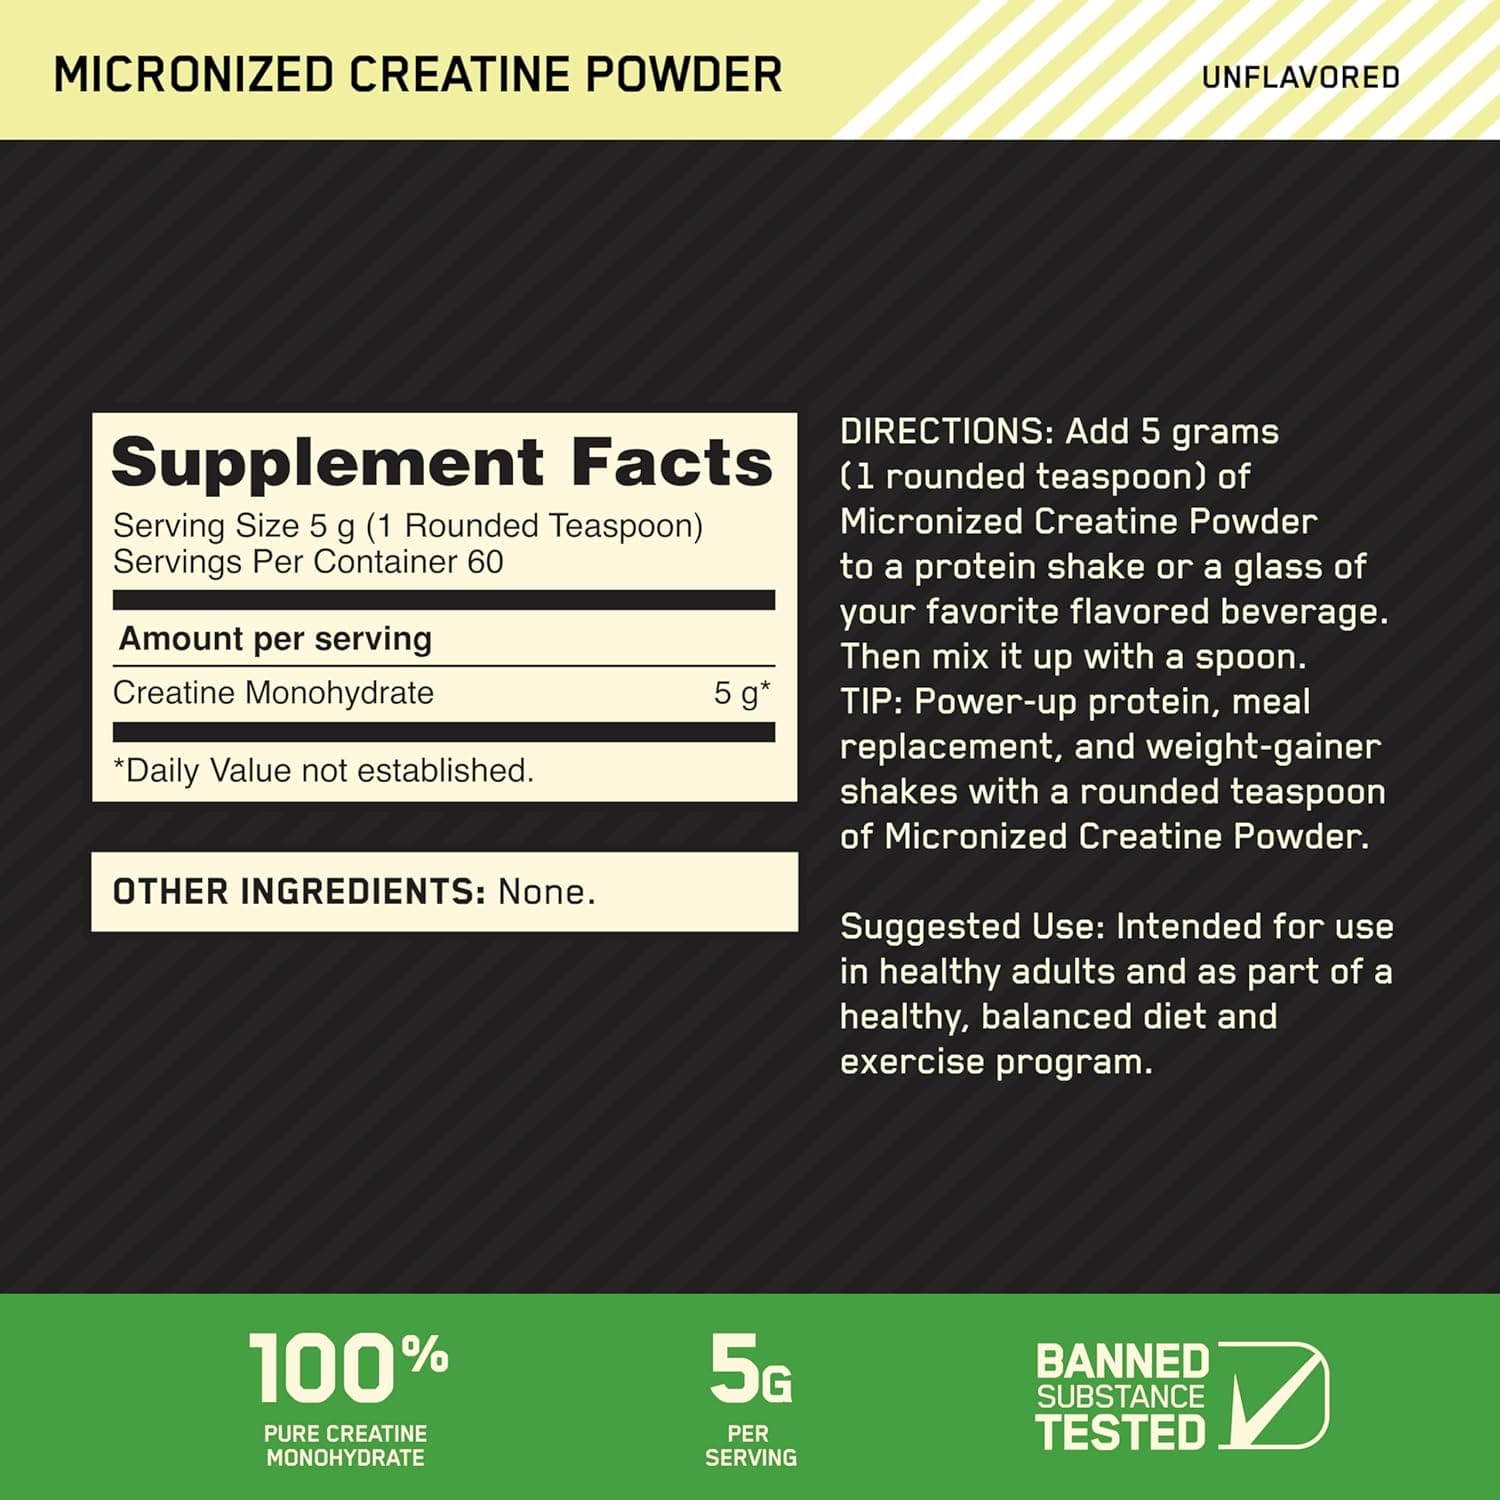 Optimum Nutrition Micronized Creatine Powder for Muscle Size, Strength & Performance, Unflavored, 300 Grams